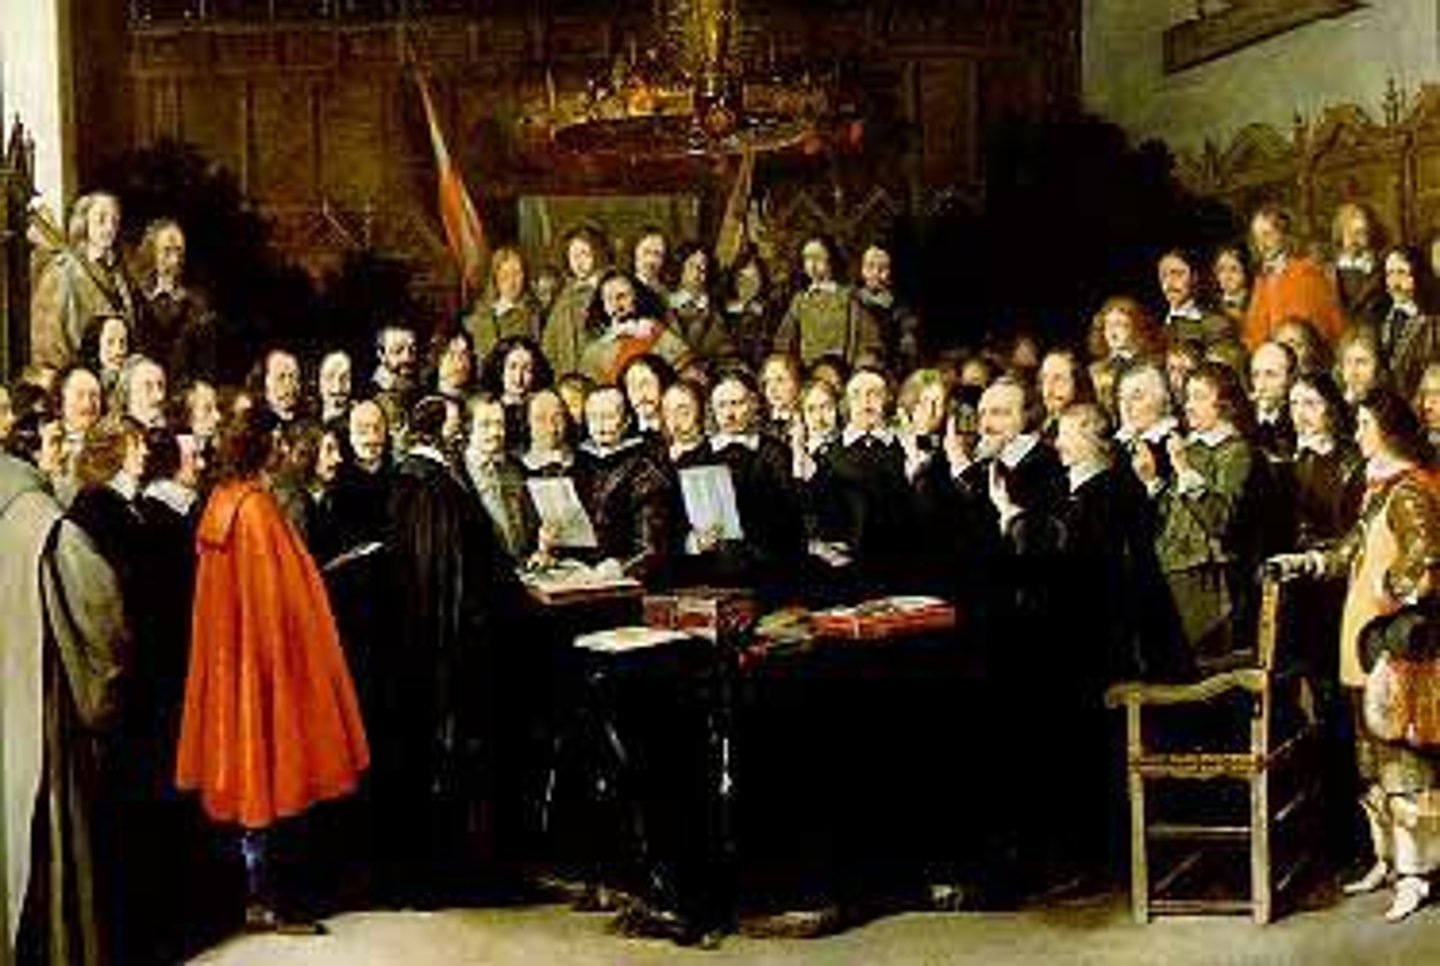 <p>Was a series of peace treaties signed between May and October 1648, effectively ending: the European wars of religion, 30 Years War, and Period 1 of AP Euro</p>